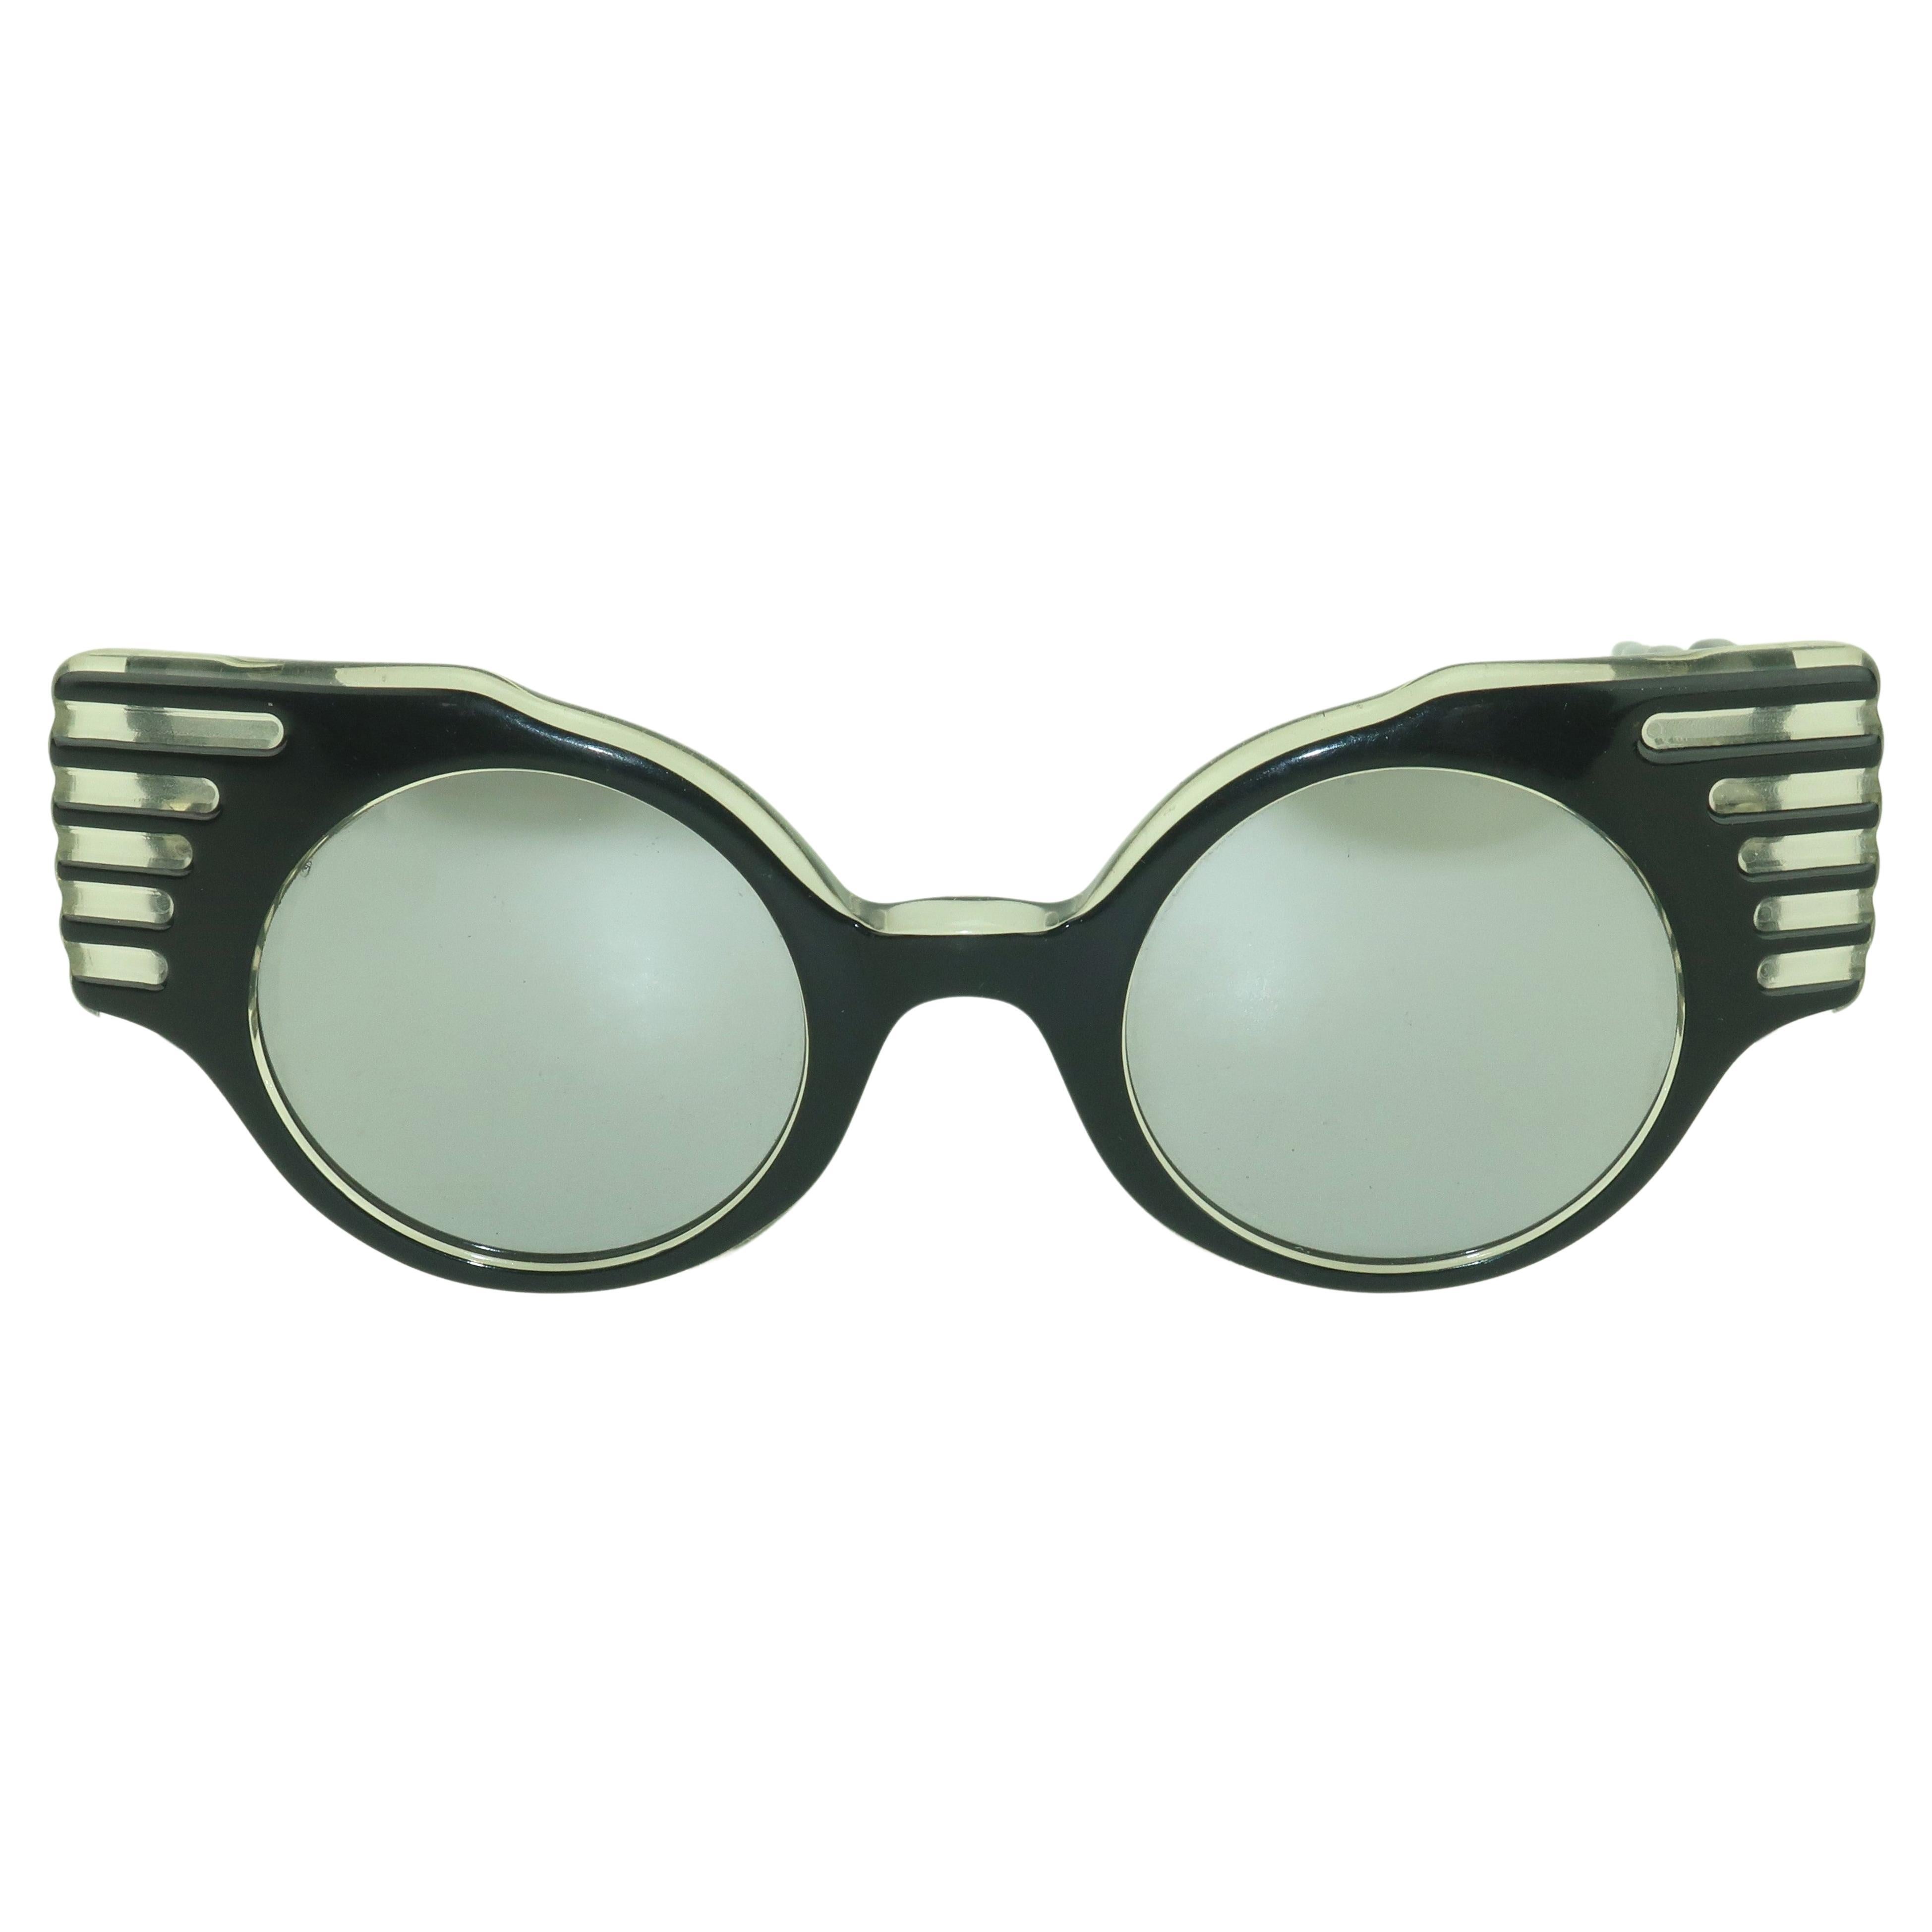 Michele Lamy French Black 'Cadillac Tailfin' Sunglasses, 1980's For Sale